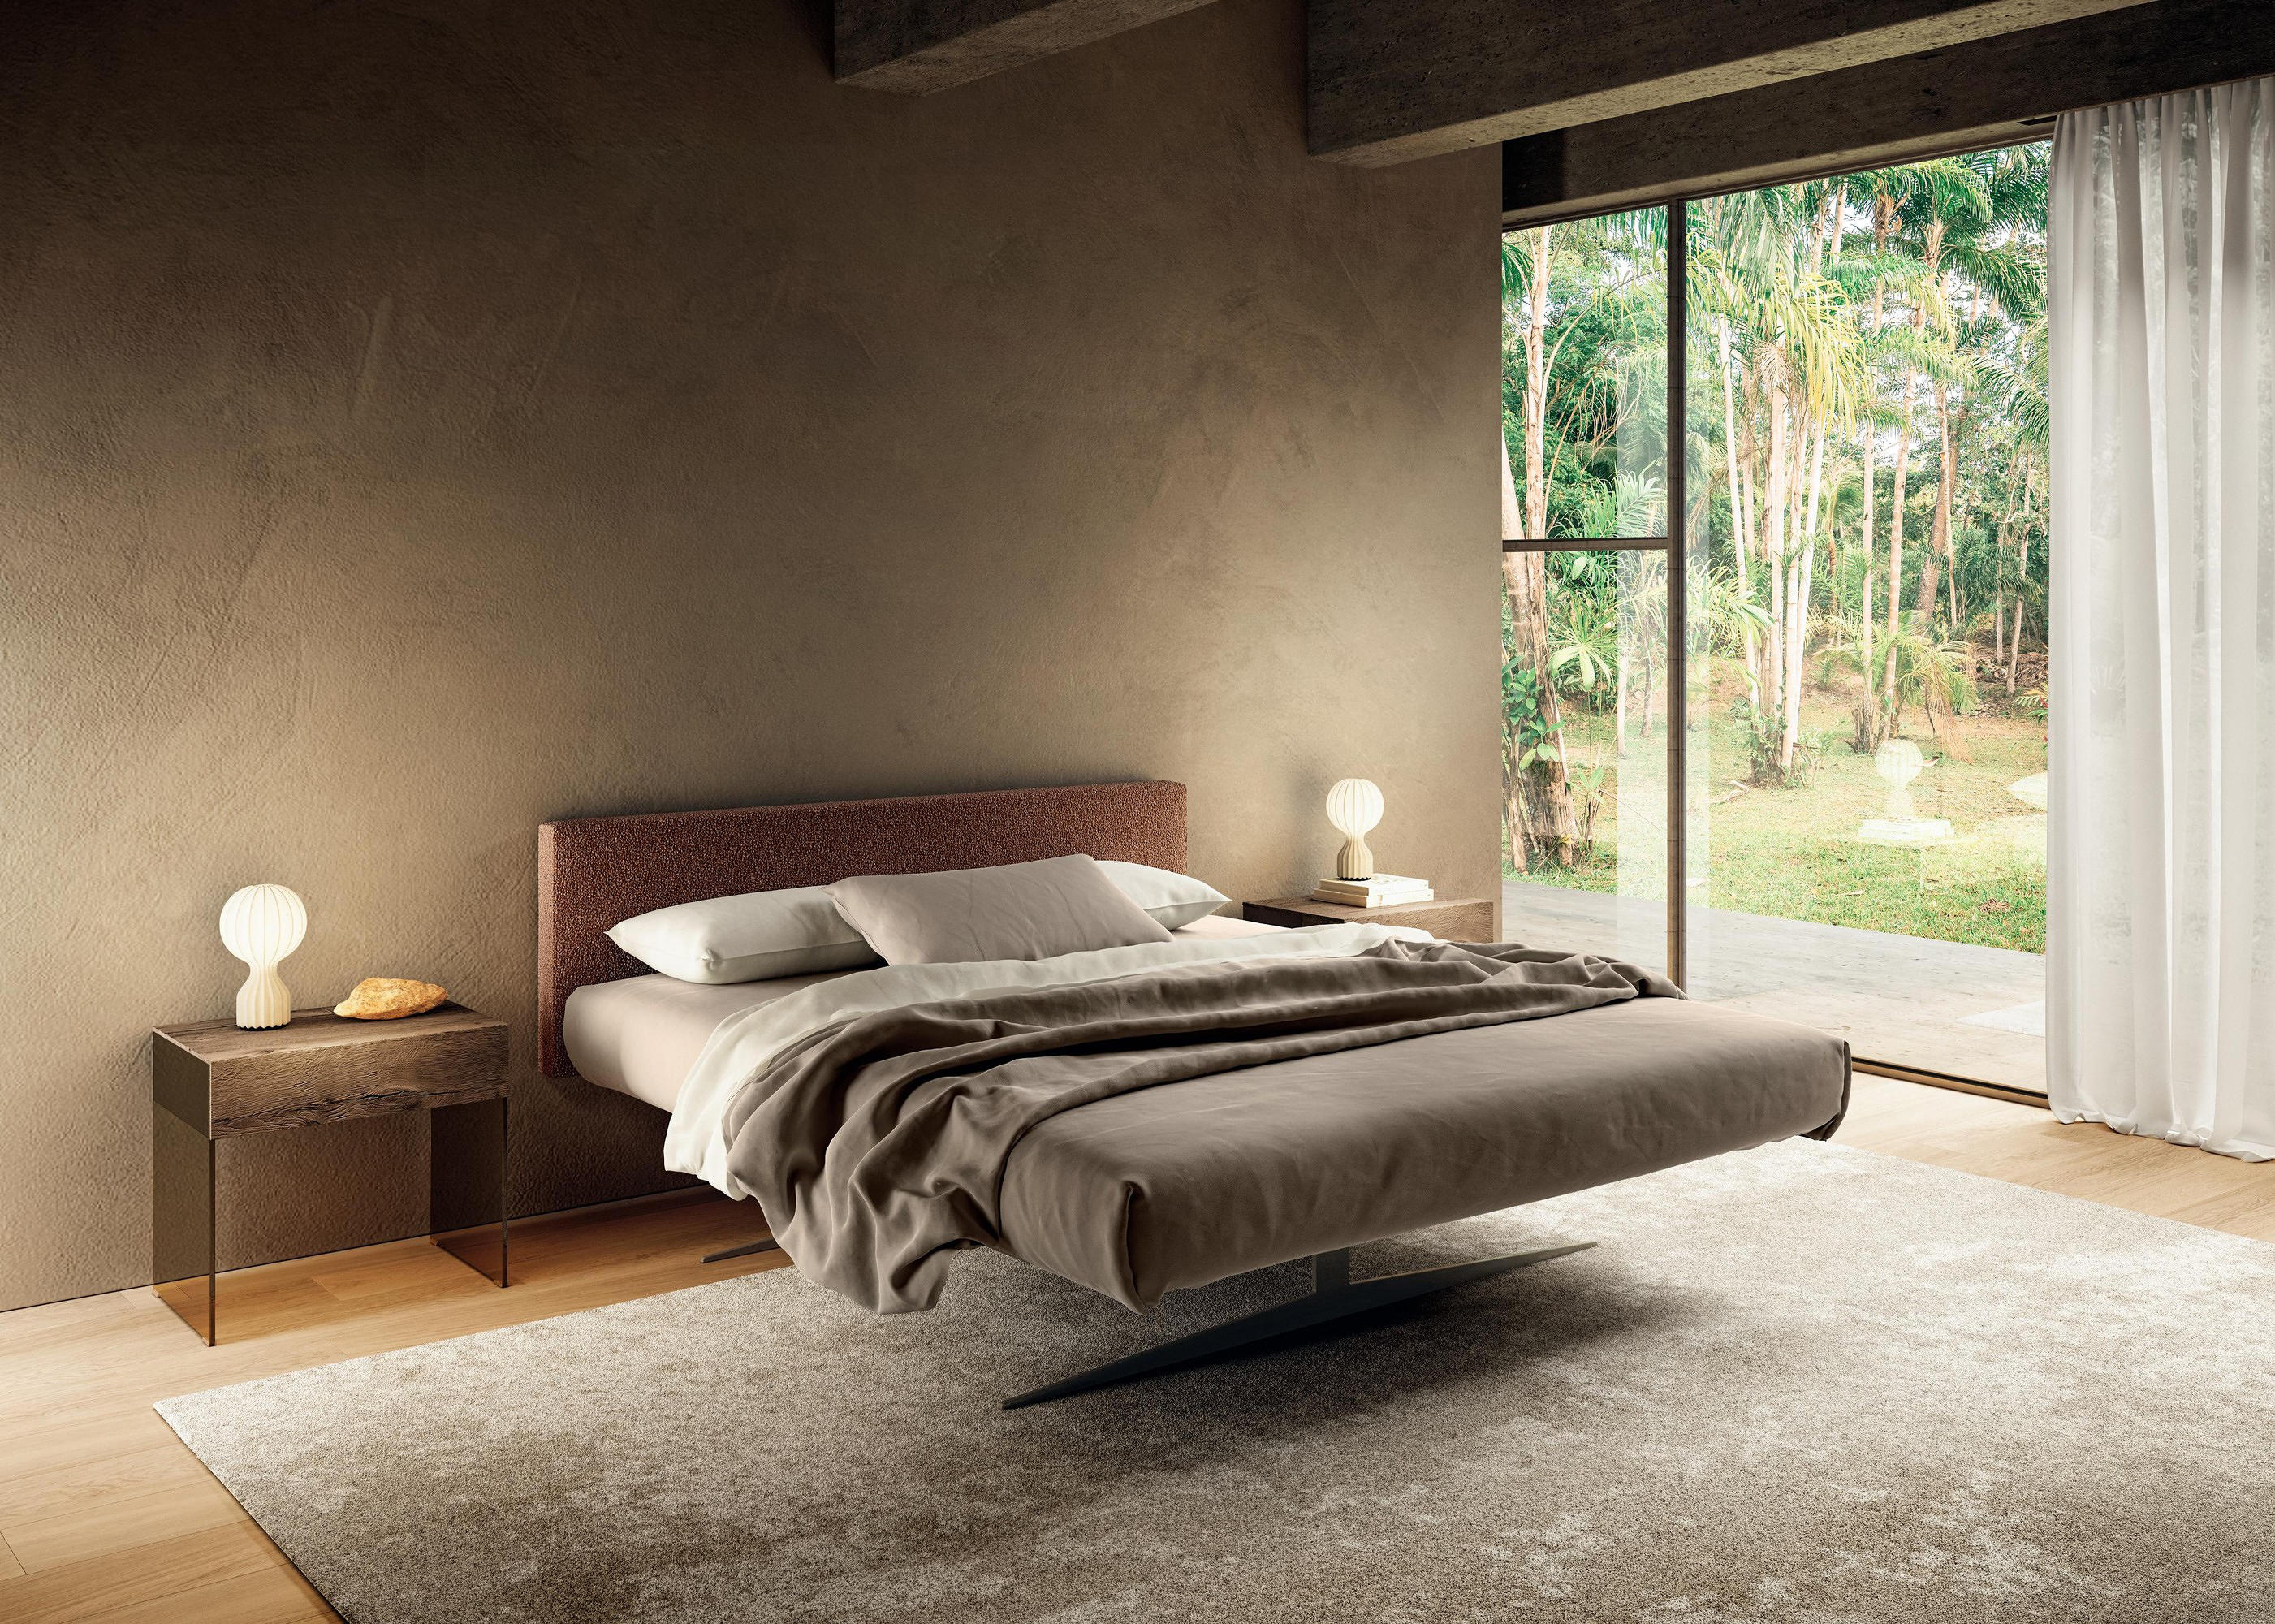 STEEL BED 1701 - Beds from LAGO | Architonic